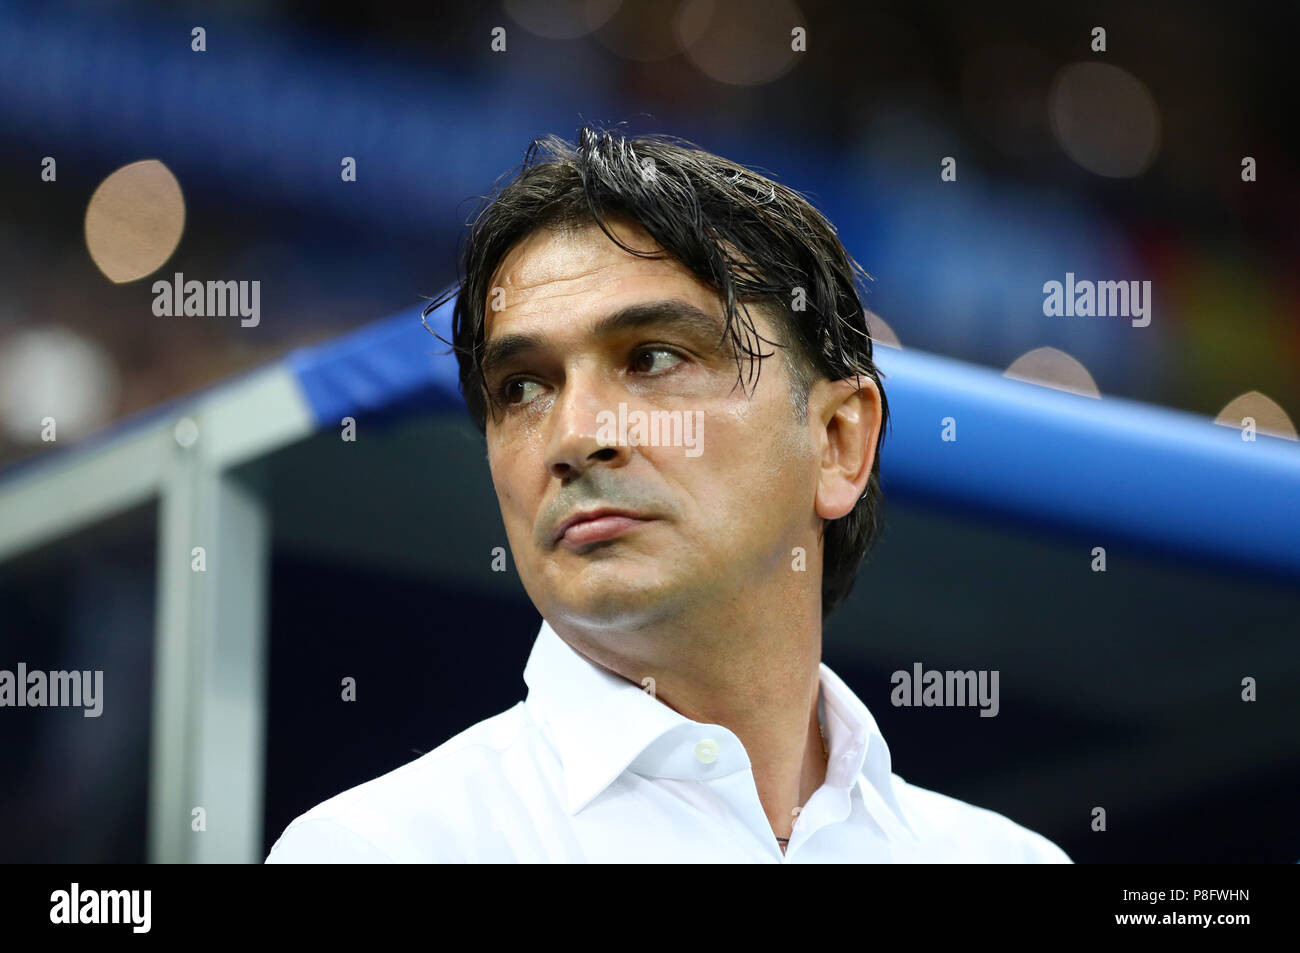 Croatia manager Zlatko Dalic during the FIFA World Cup, Semi Final match at the Luzhniki Stadium, Moscow. PRESS ASSOCIATION Photo. Picture date: Wednesday July 11, 2018. See PA story WORLDCUP Croatia. Photo credit should read: Tim Goode/PA Wire. Stock Photo